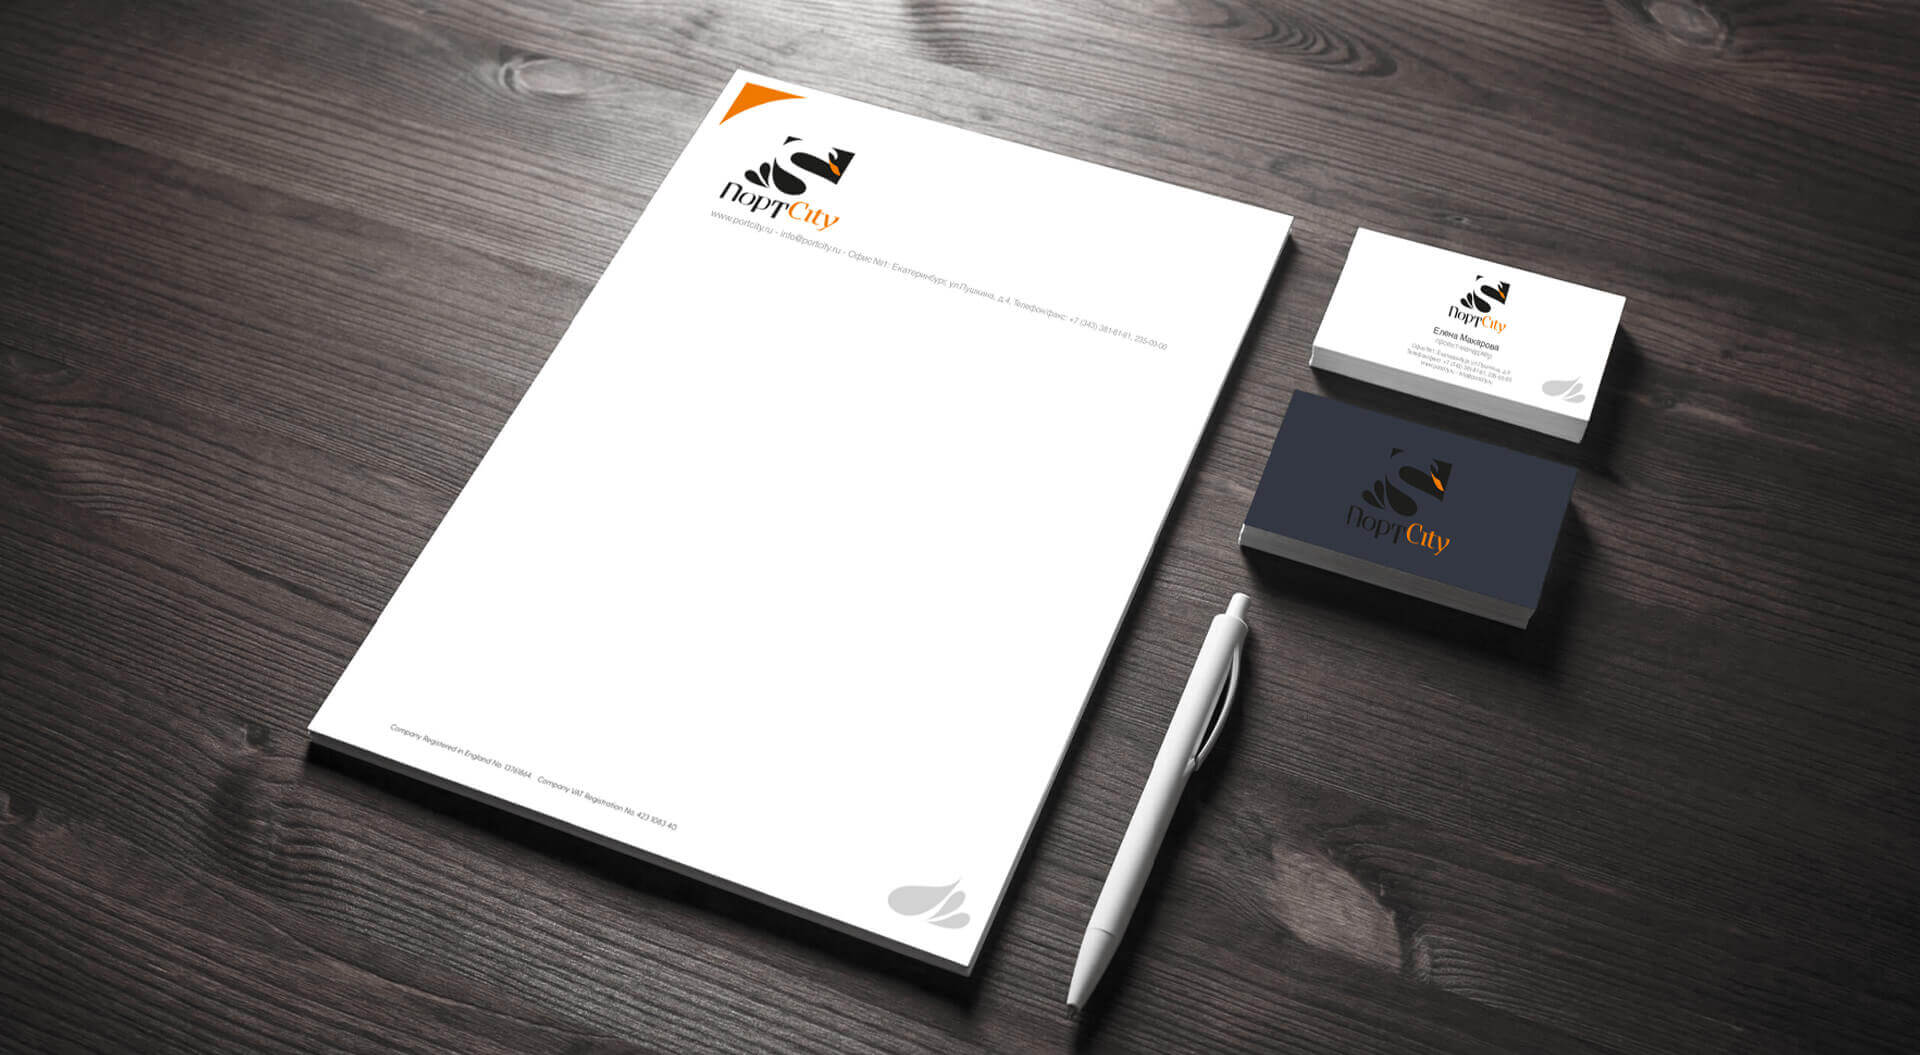 Port City Shopping Mall stationery, letterhead and business cards